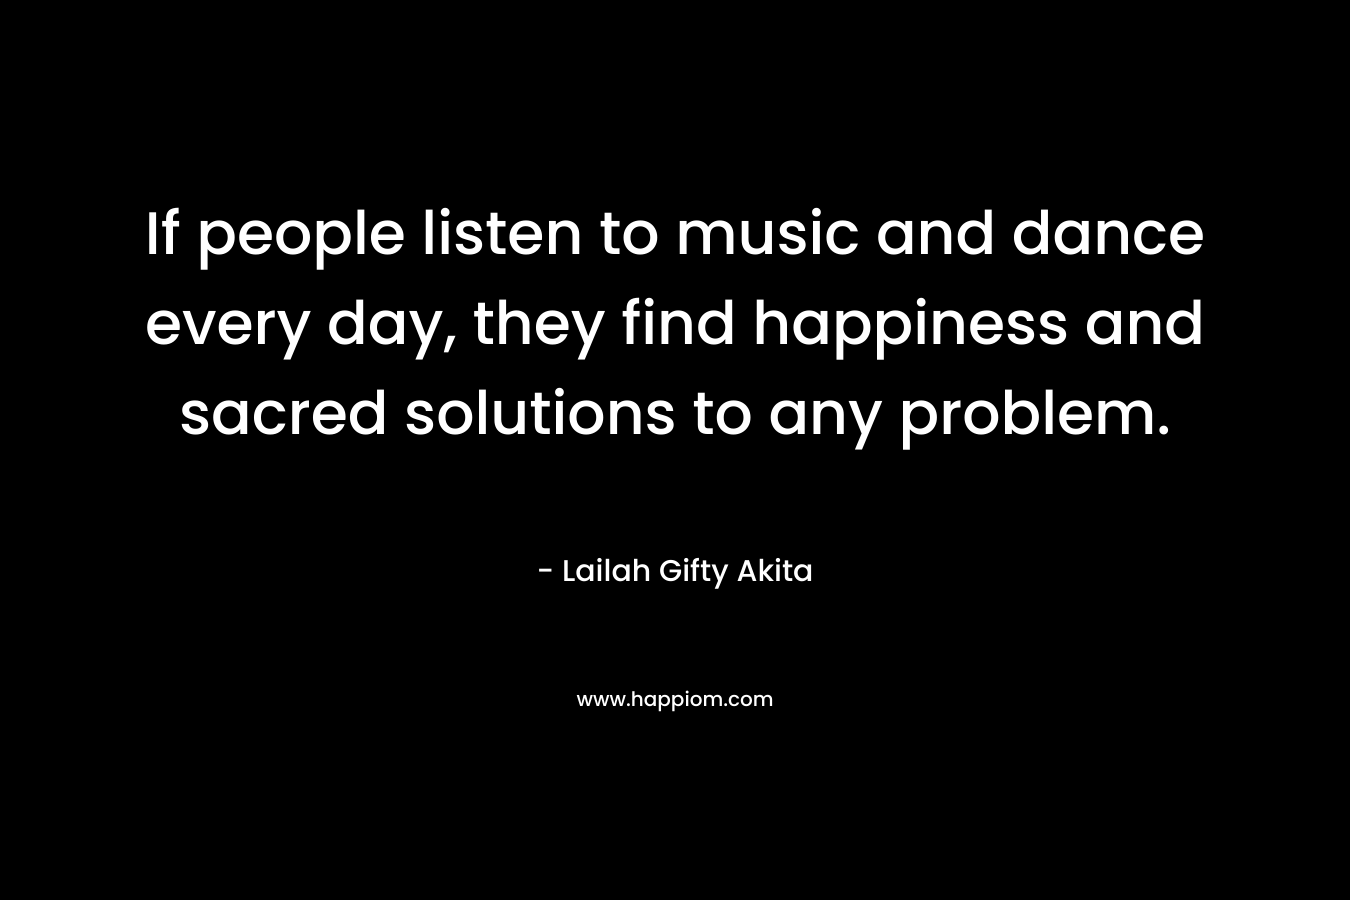 If people listen to music and dance every day, they find happiness and sacred solutions to any problem.